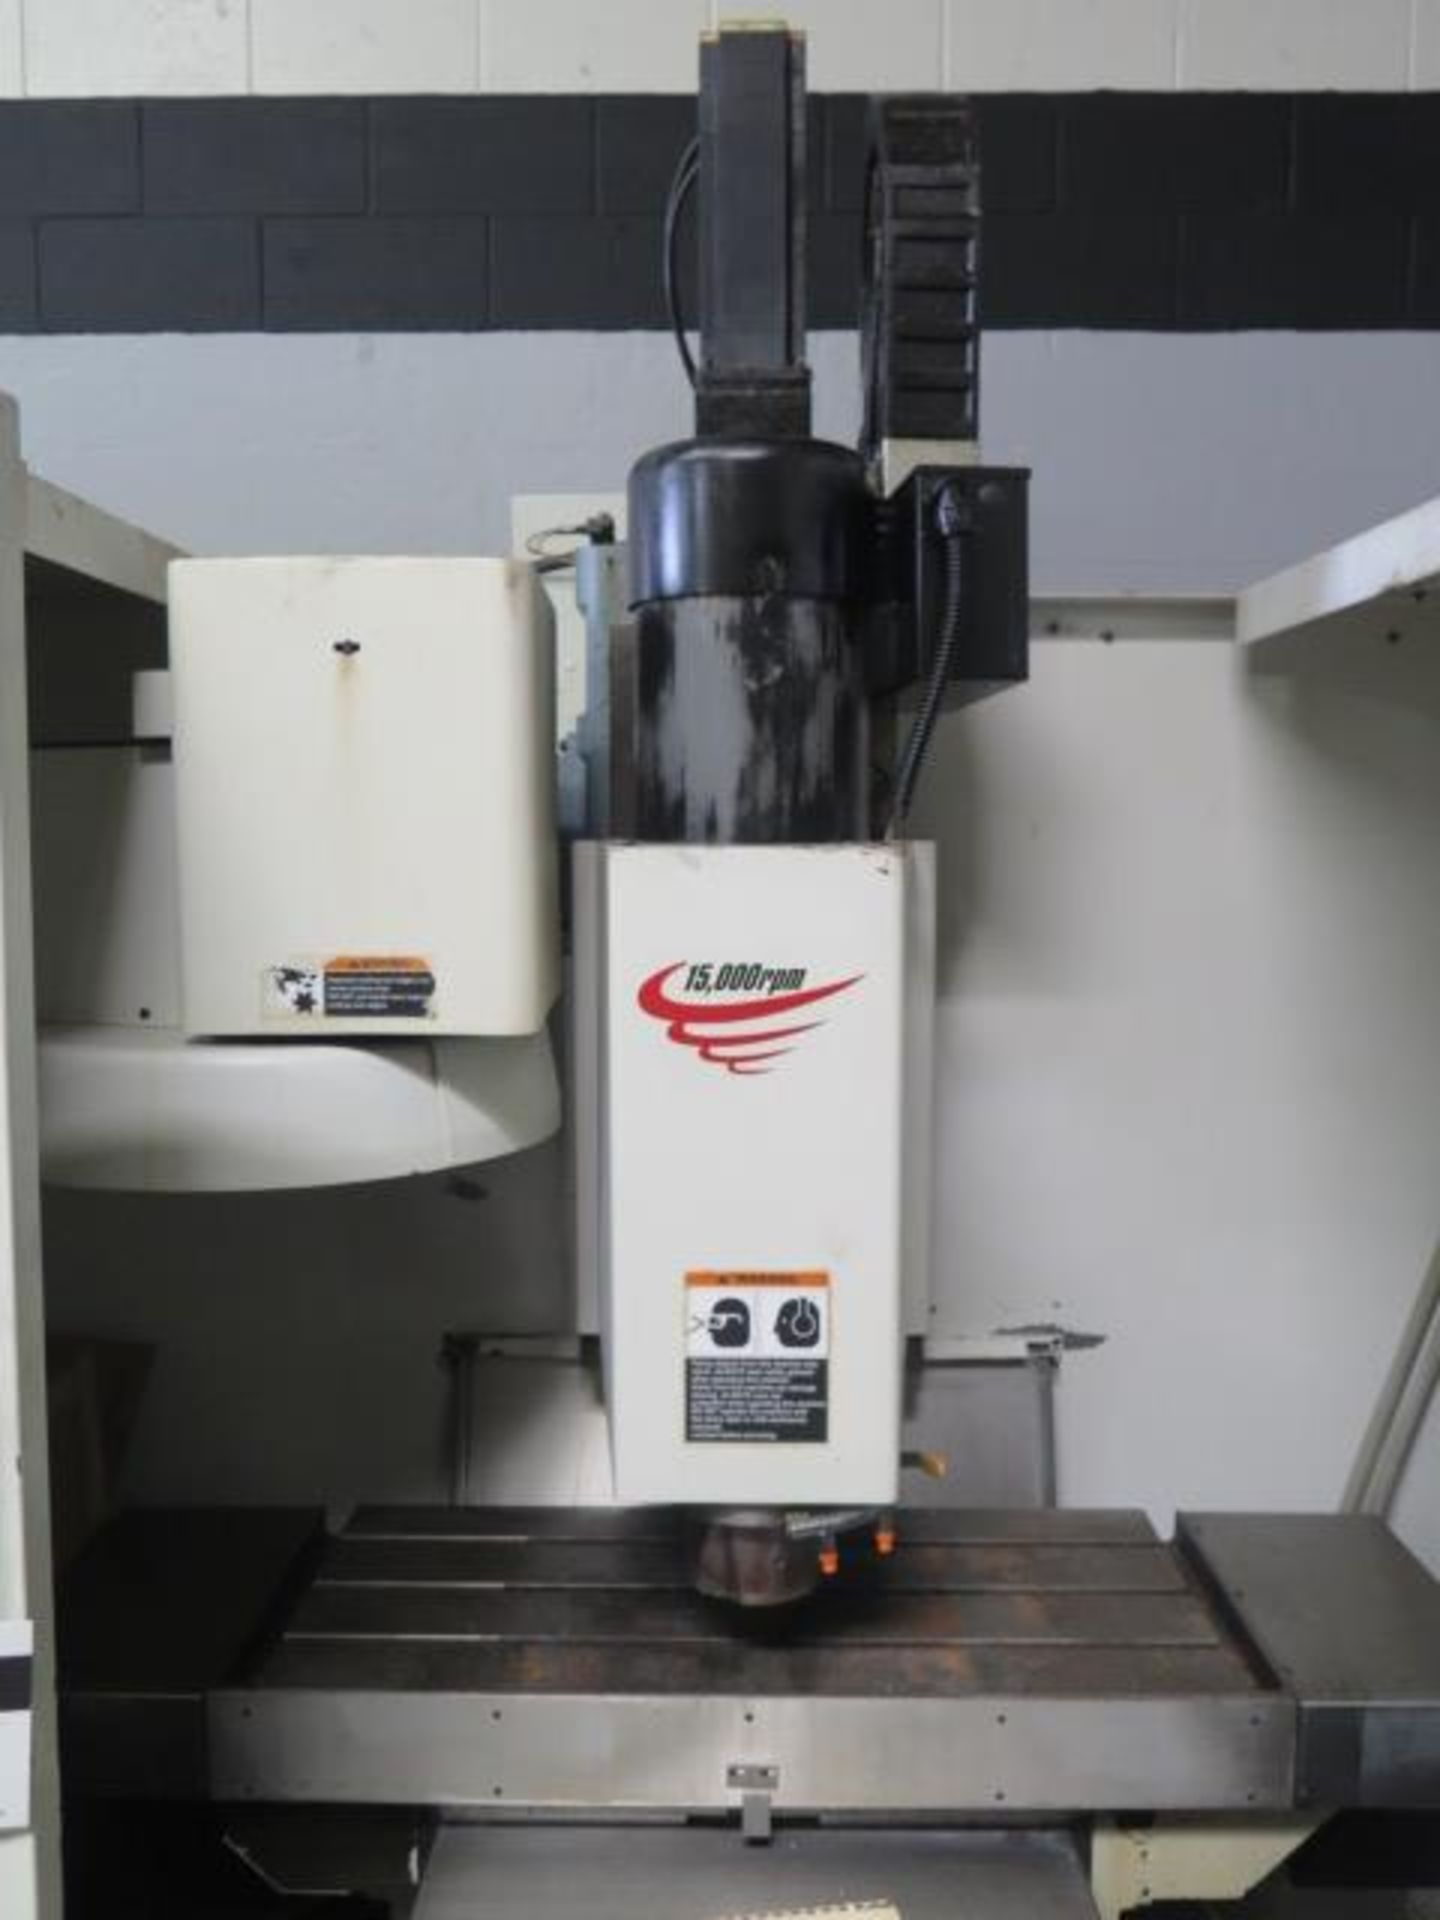 2001 Fadal VMC2216 CNC VMC s/n 012001011980 w/ Fadal Multi Processor, Has a Bad Spindle, SOLD AS IS - Image 4 of 14